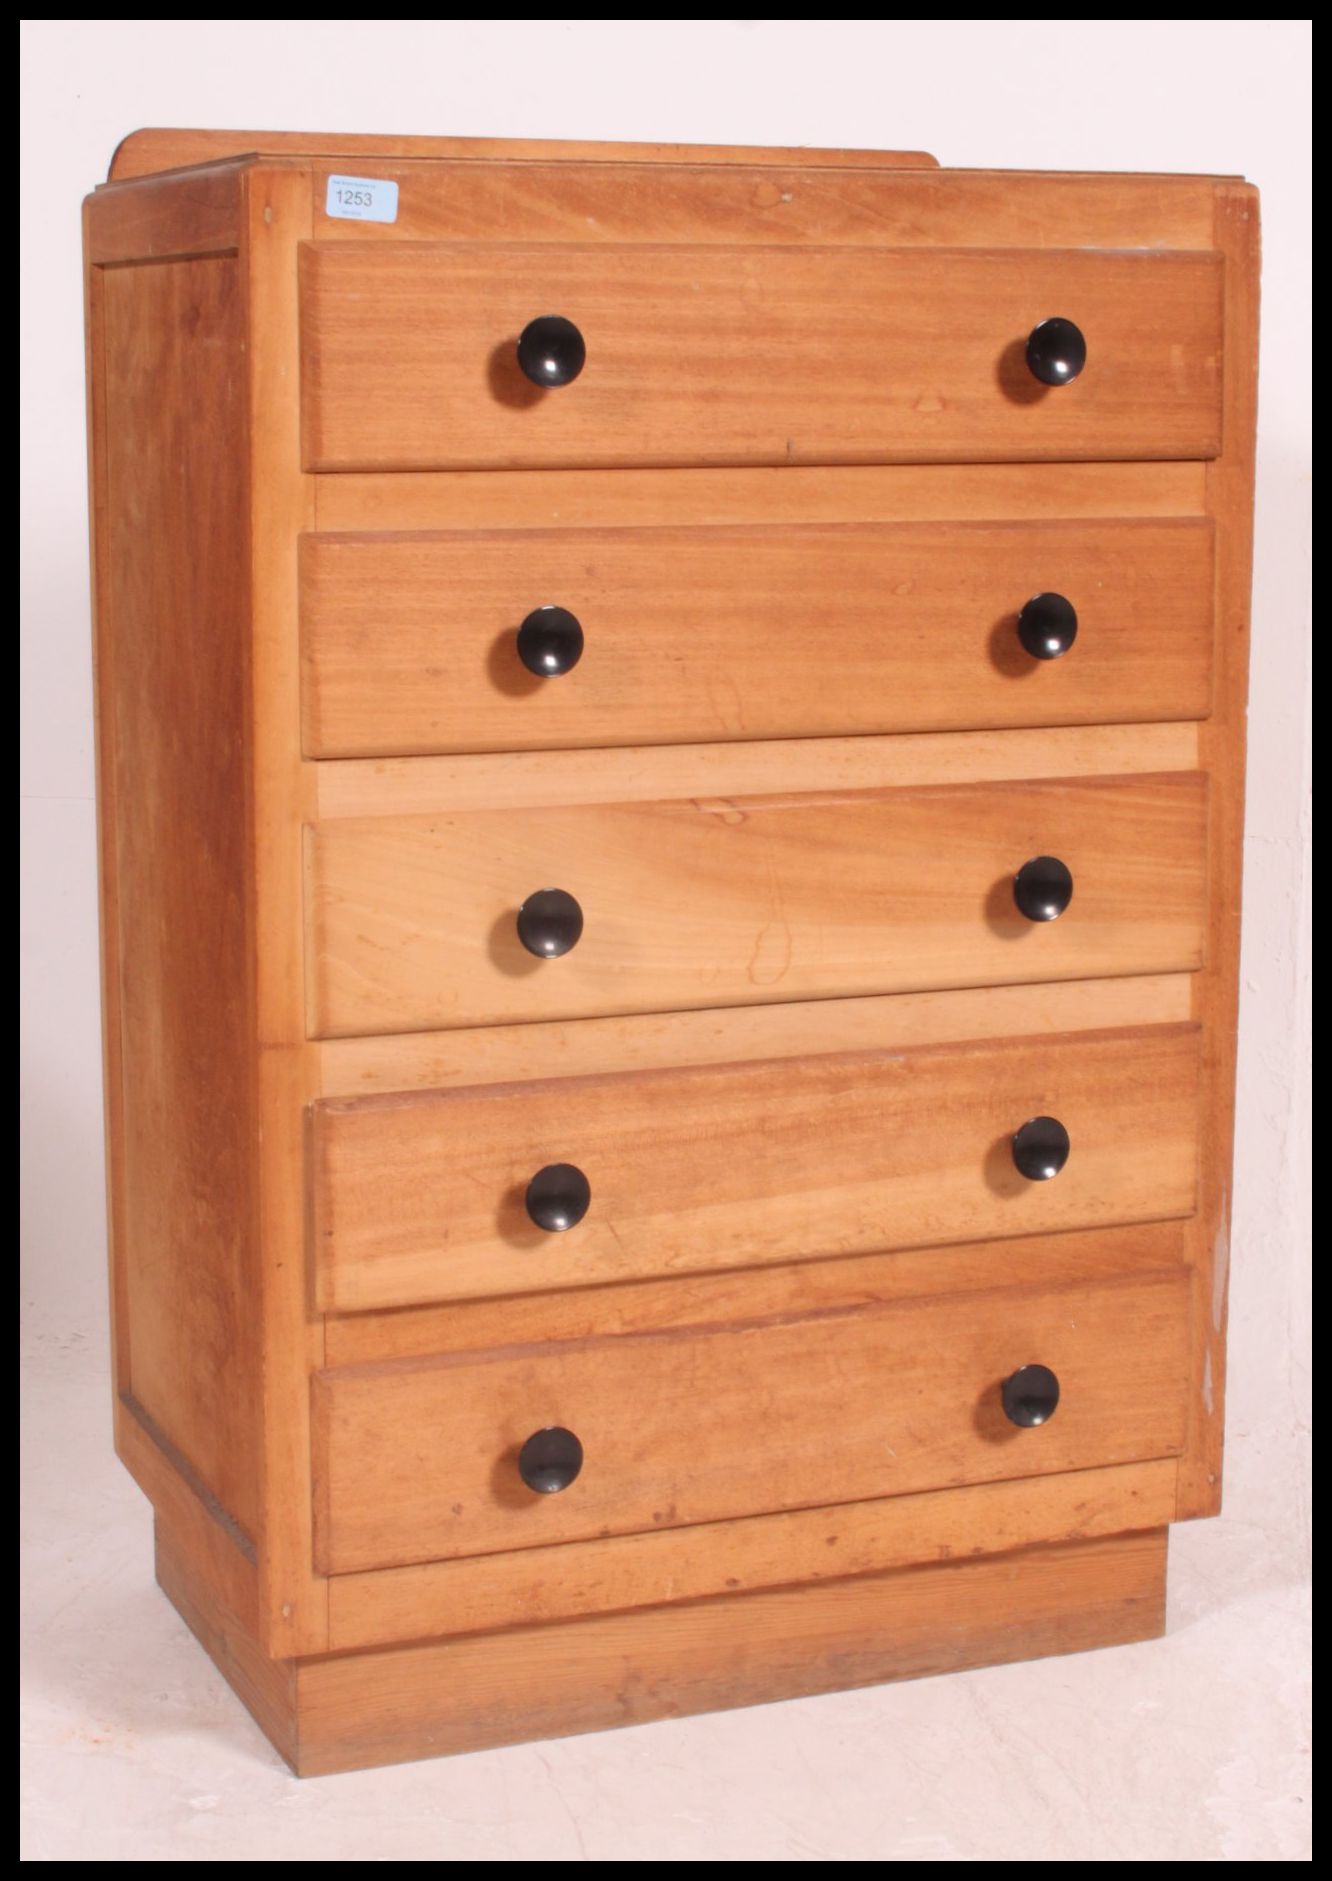 A 1930's Art Deco beech wood panel chest of drawers.